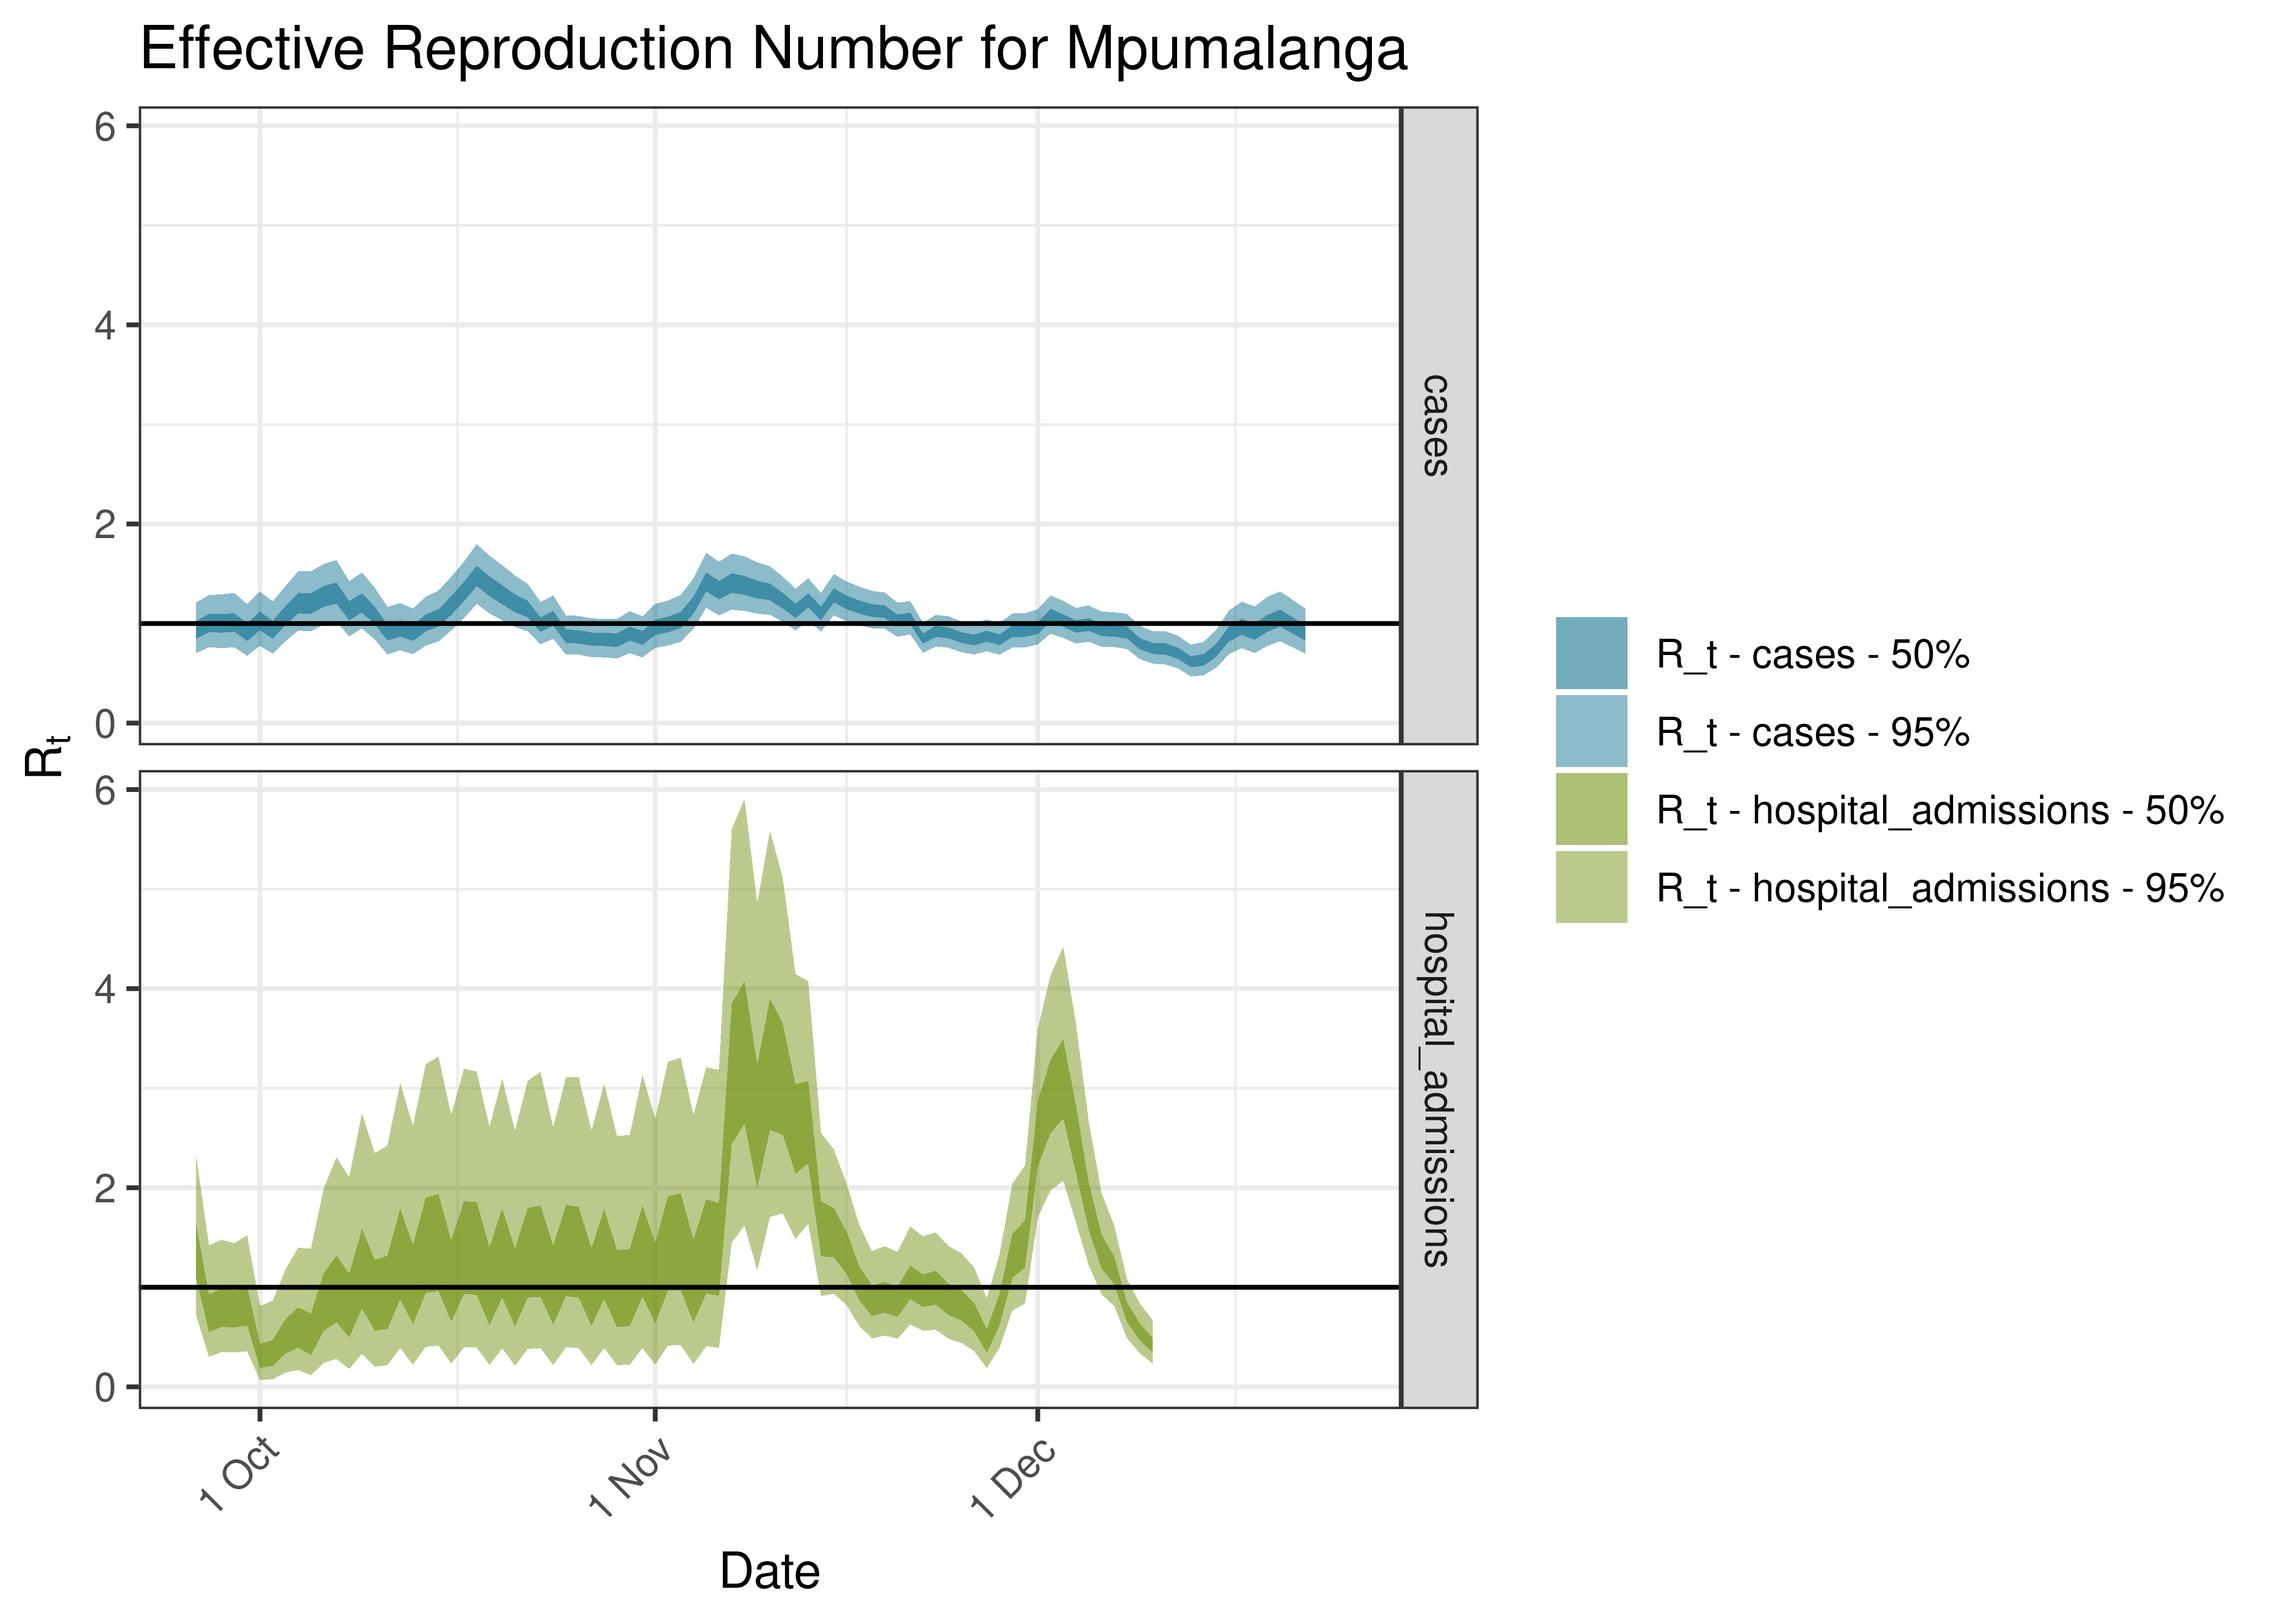 Estimated Effective Reproduction Number for Mpumalanga over last 90 days